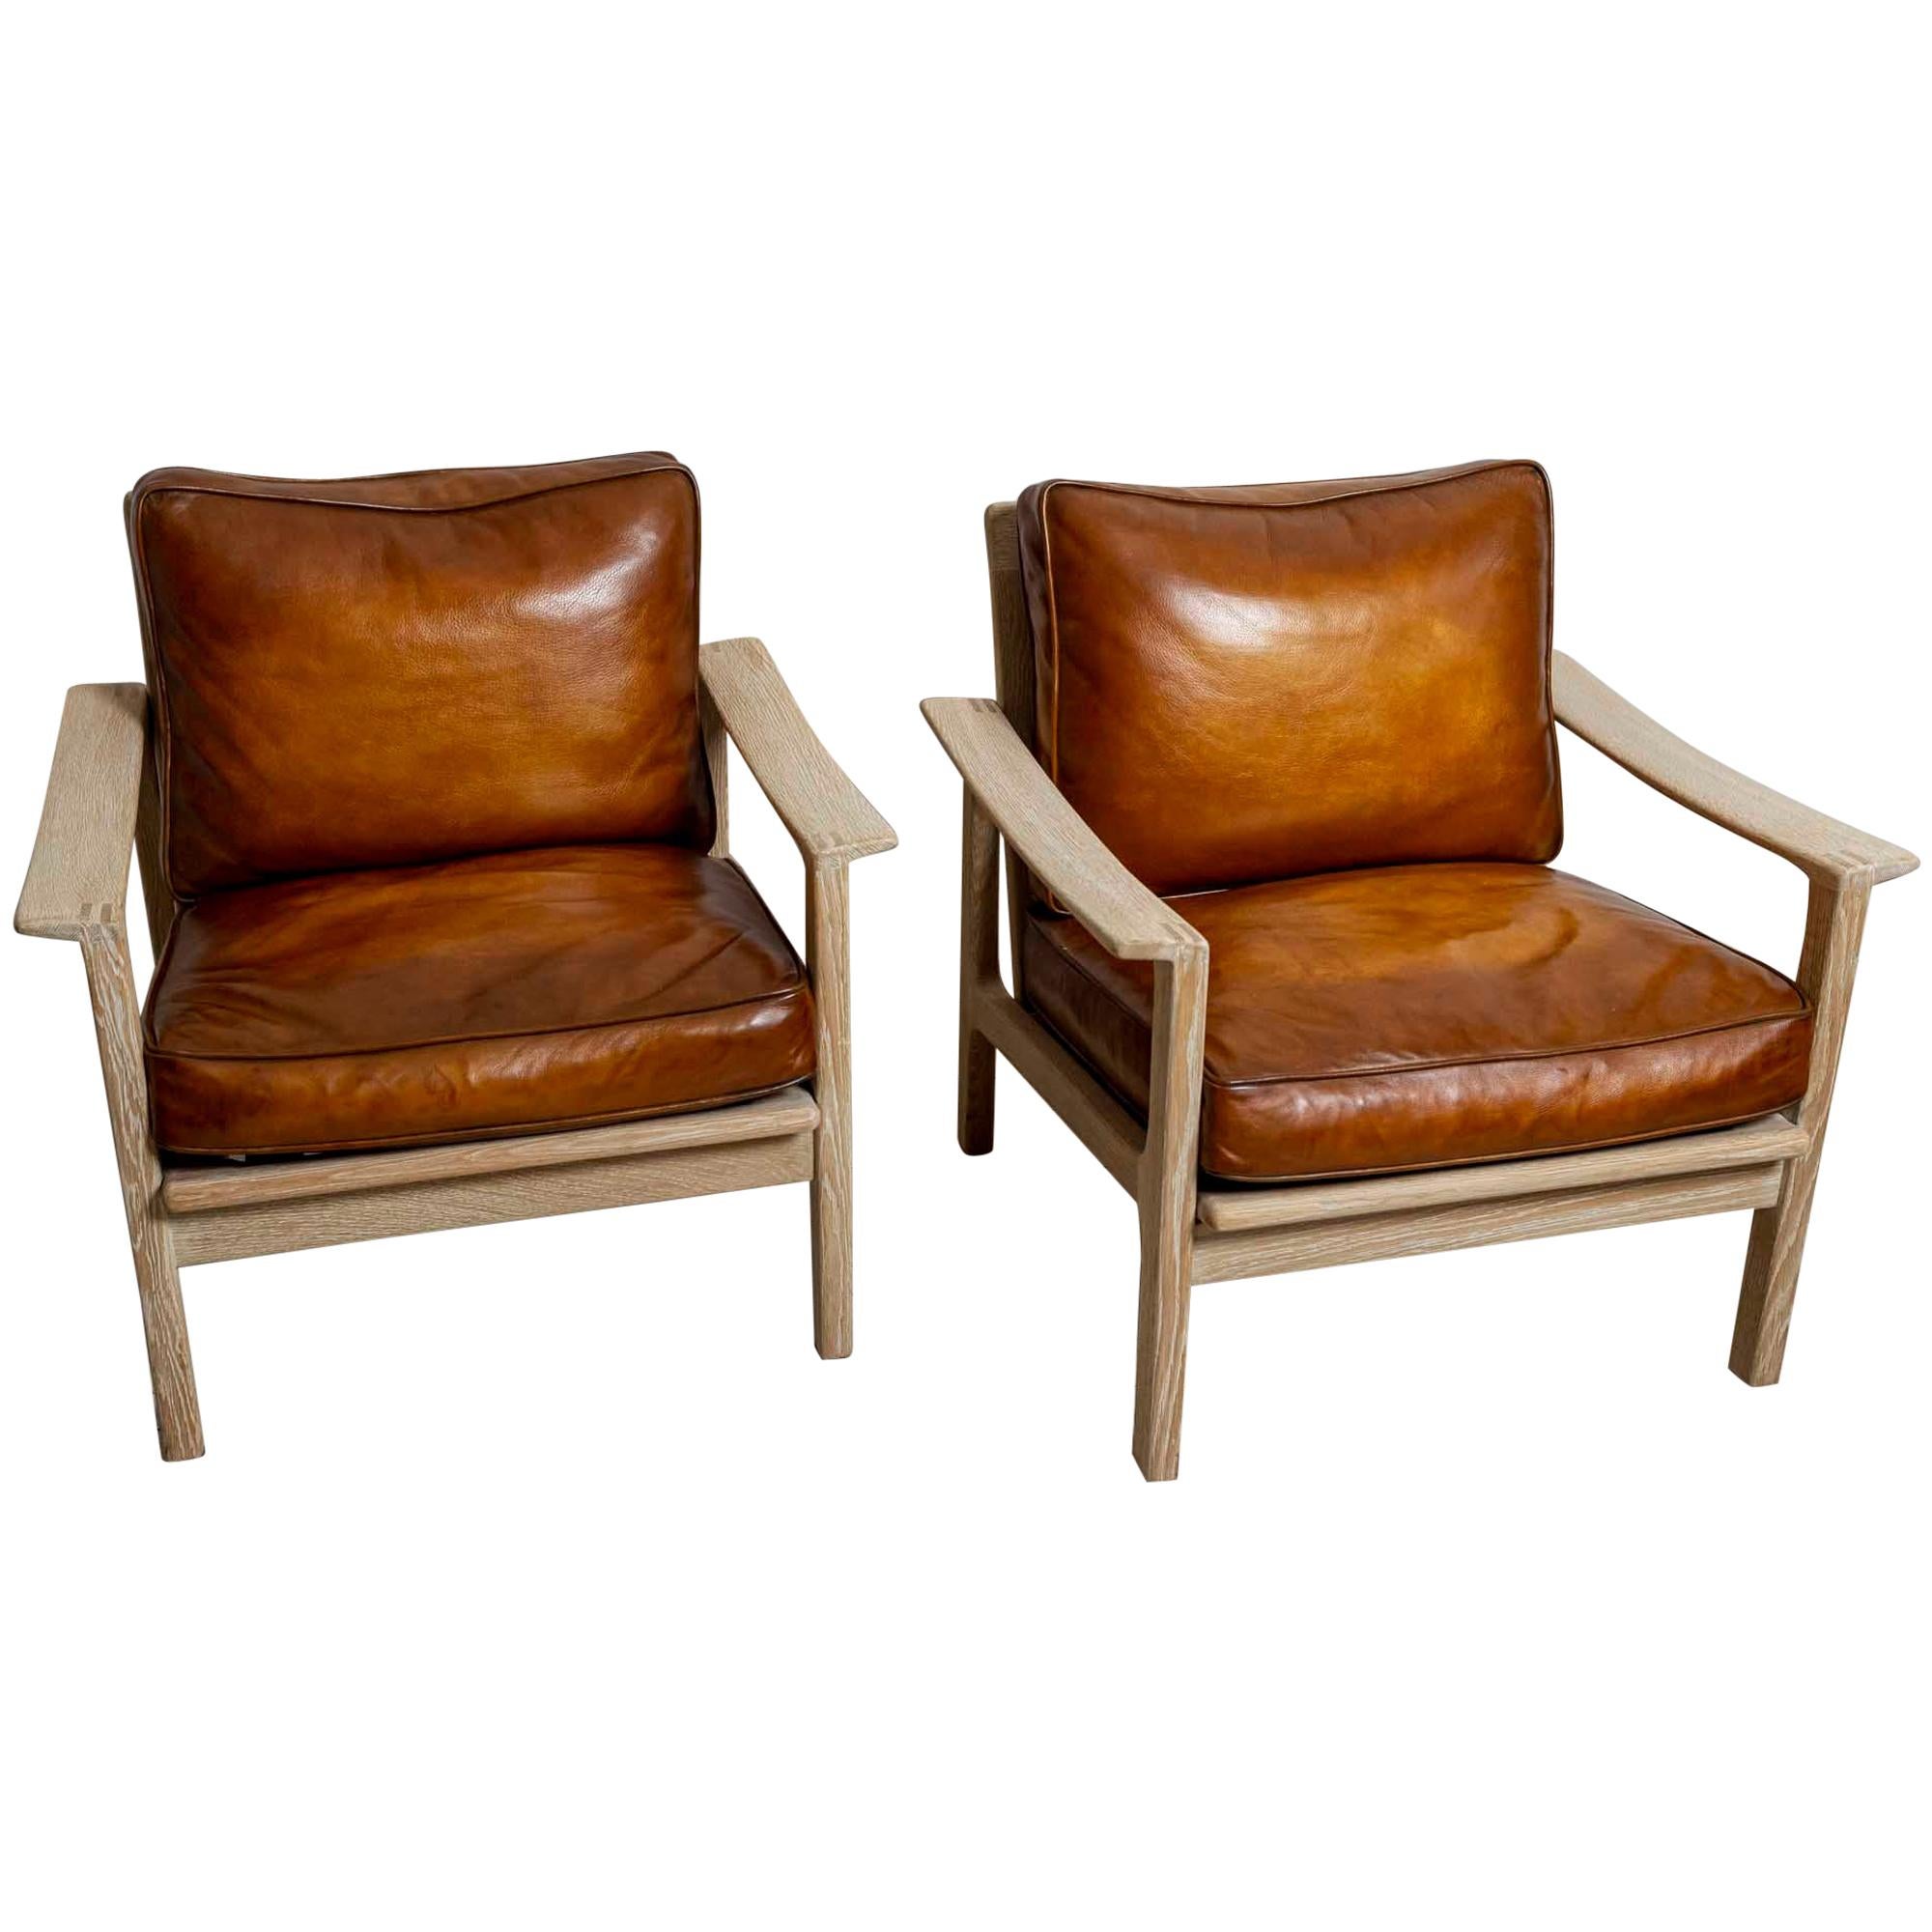 Pair of Midcentury Børge Mogensen Slatted Oak and Deep Leather Armchairs